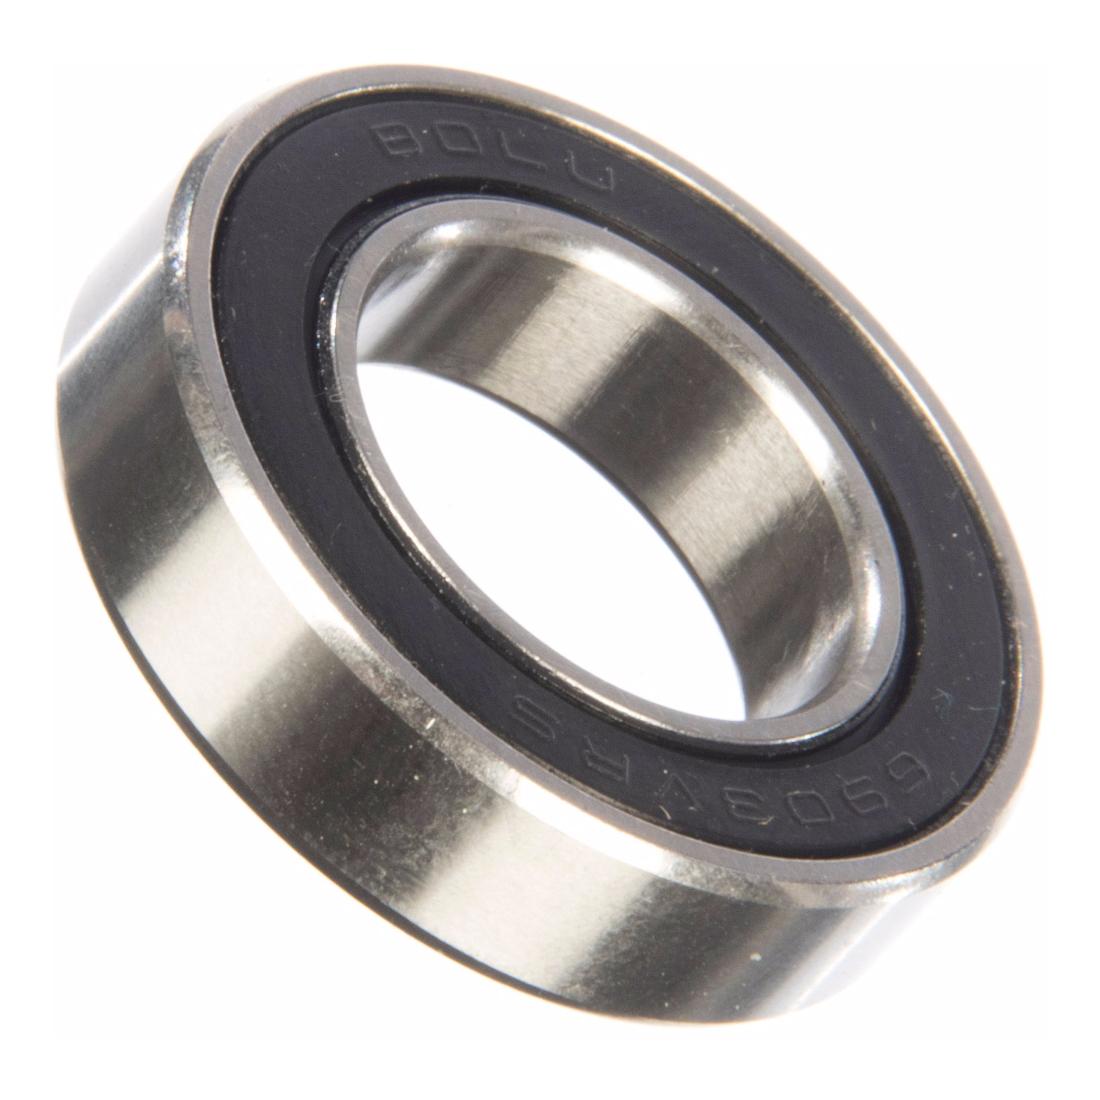 Brand-x Plus Sealed Bearing - 6903 (v2rs) - Silver